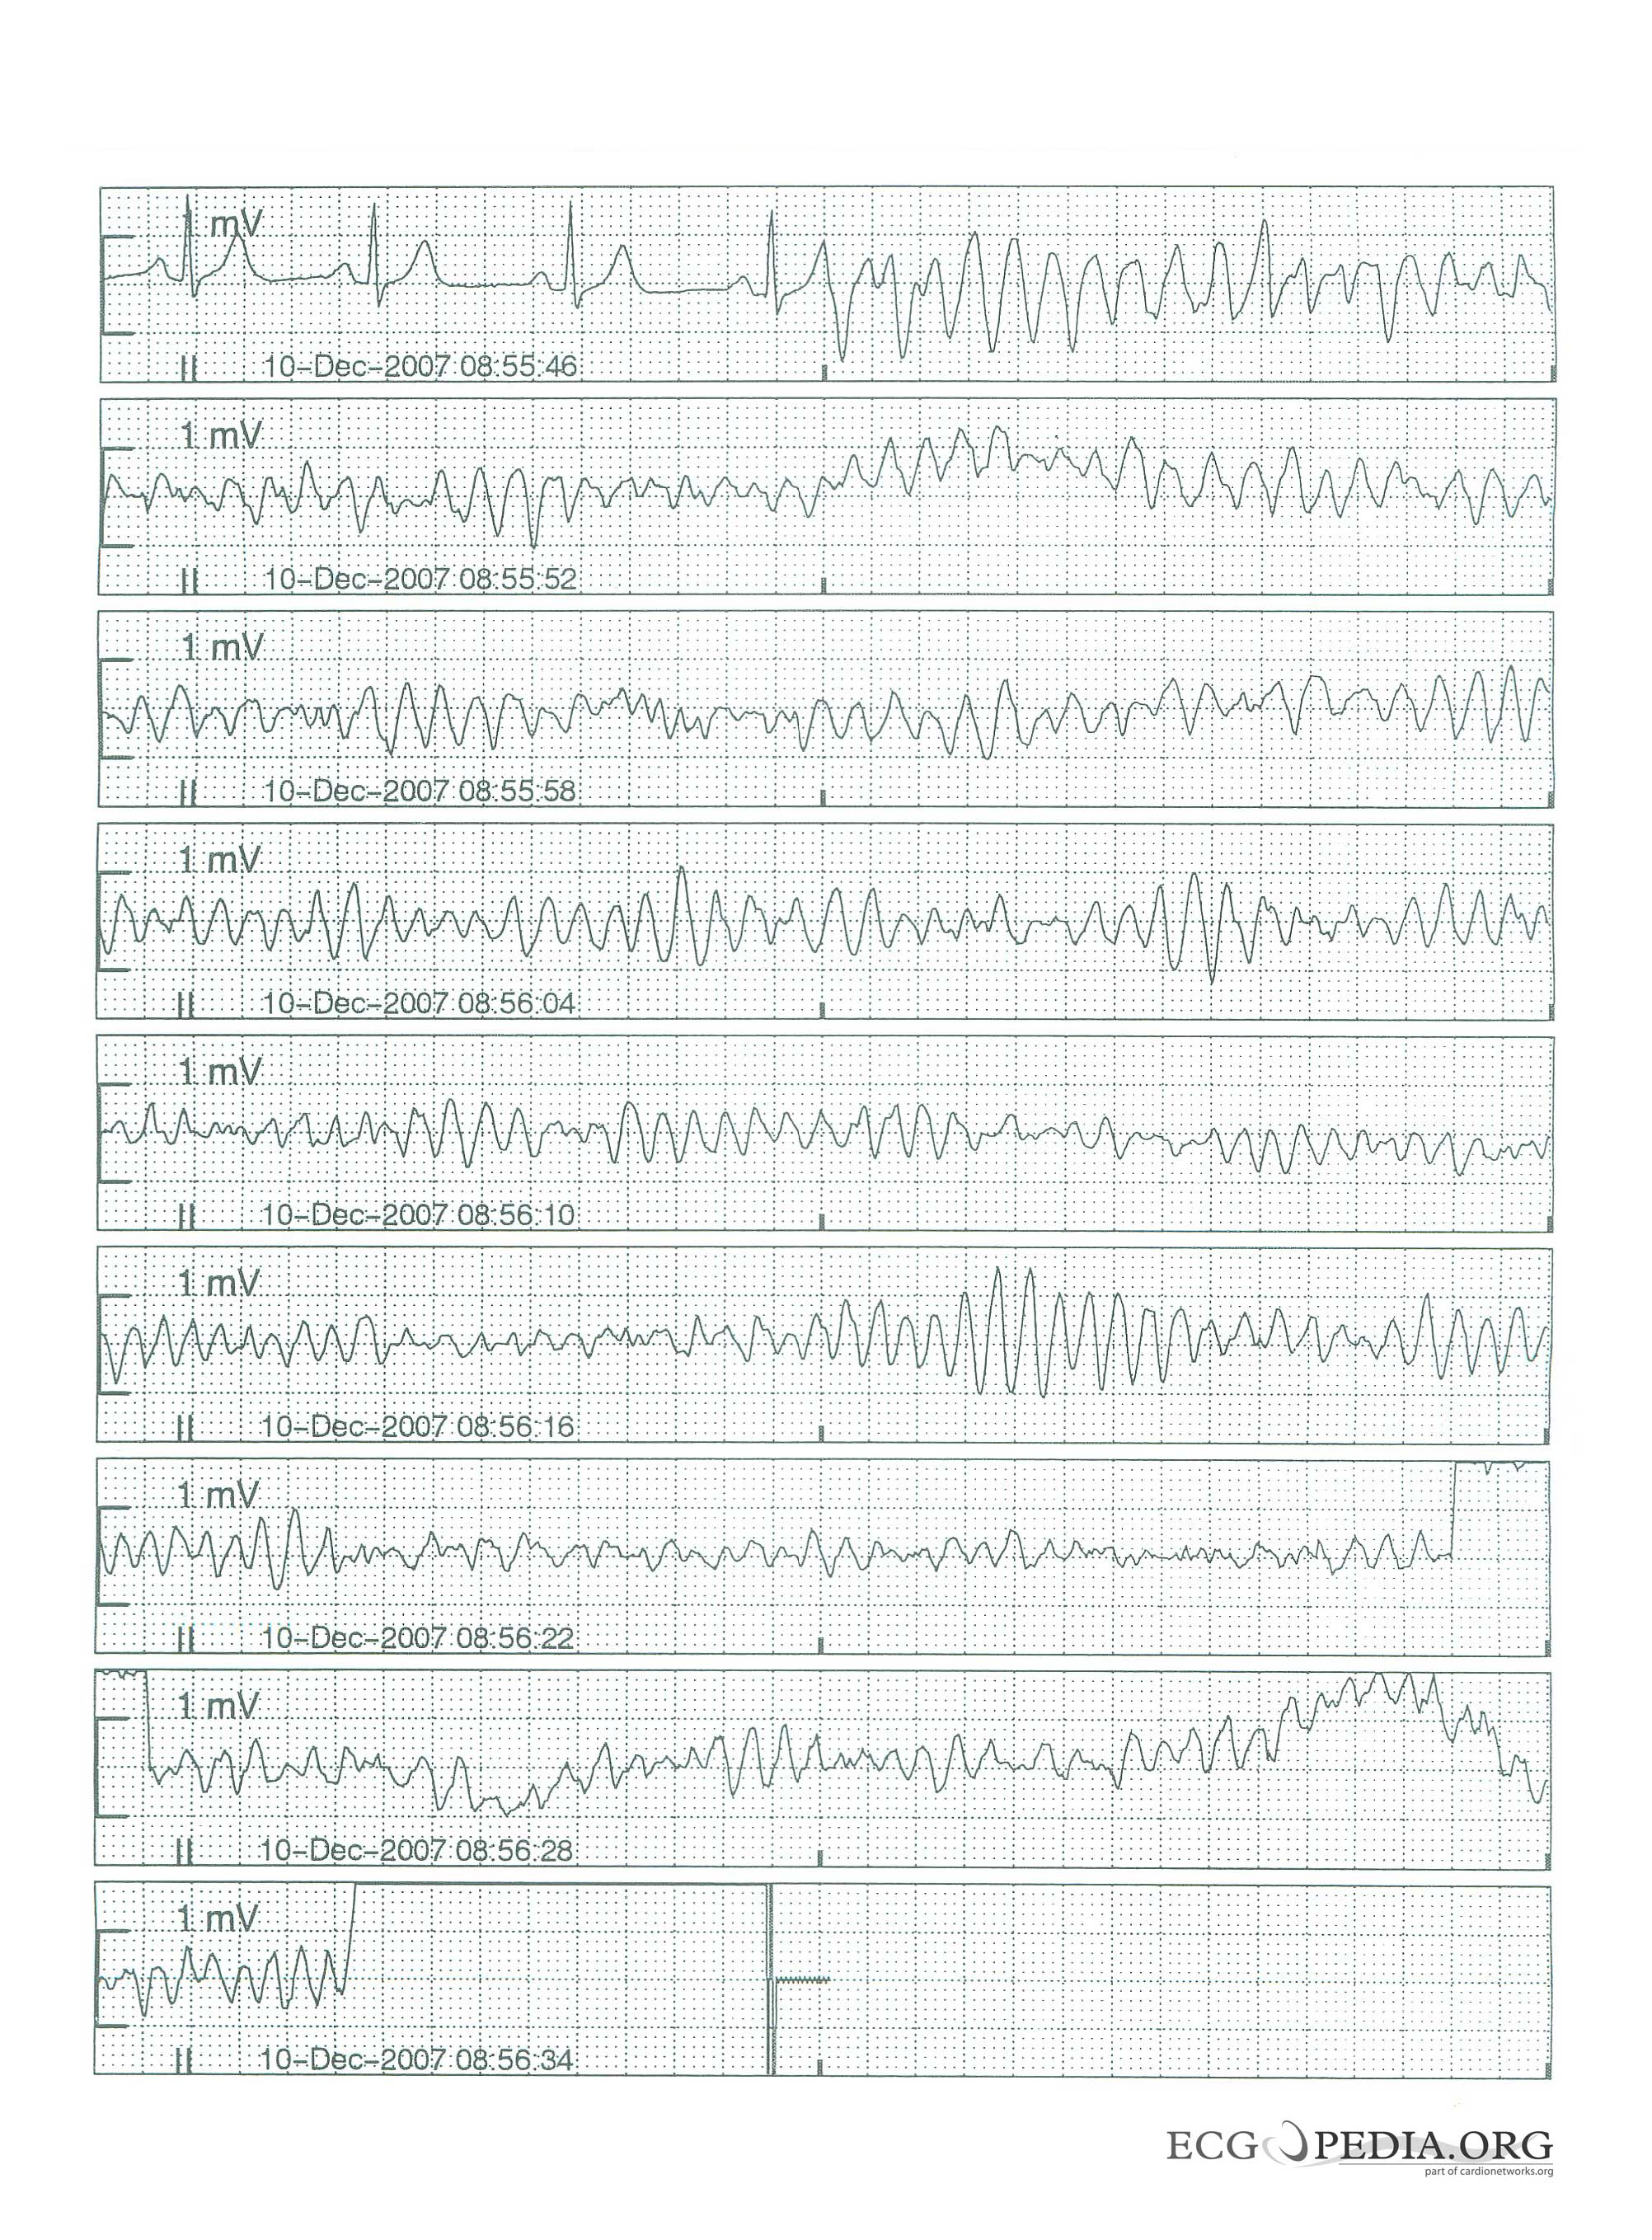 Arrhythmias in a patient with short coupled torsades de pointes degenerating in ventricular fibrillation[1]